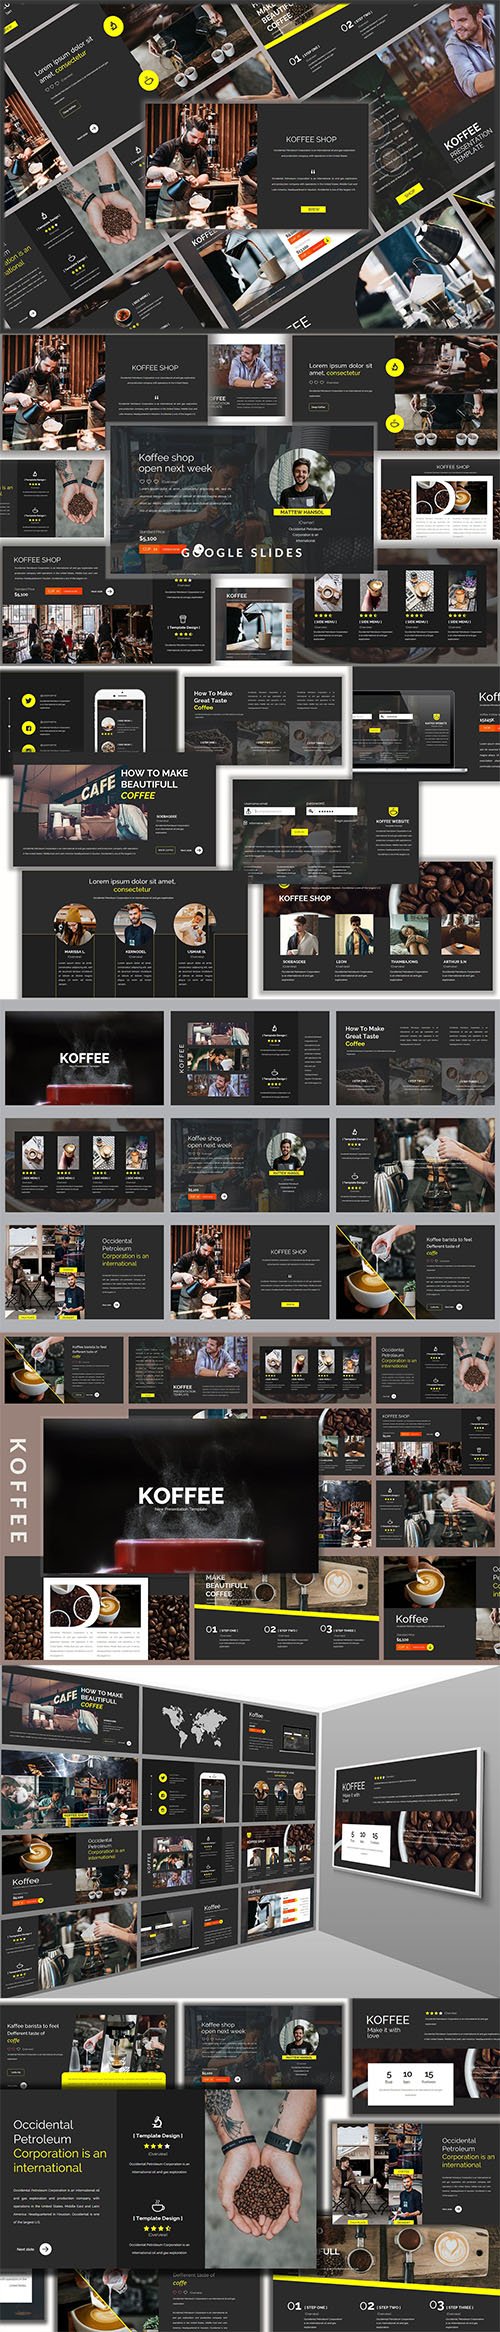 Koffee Corporate - Powerpoint, Keynote and Google Slides Templates